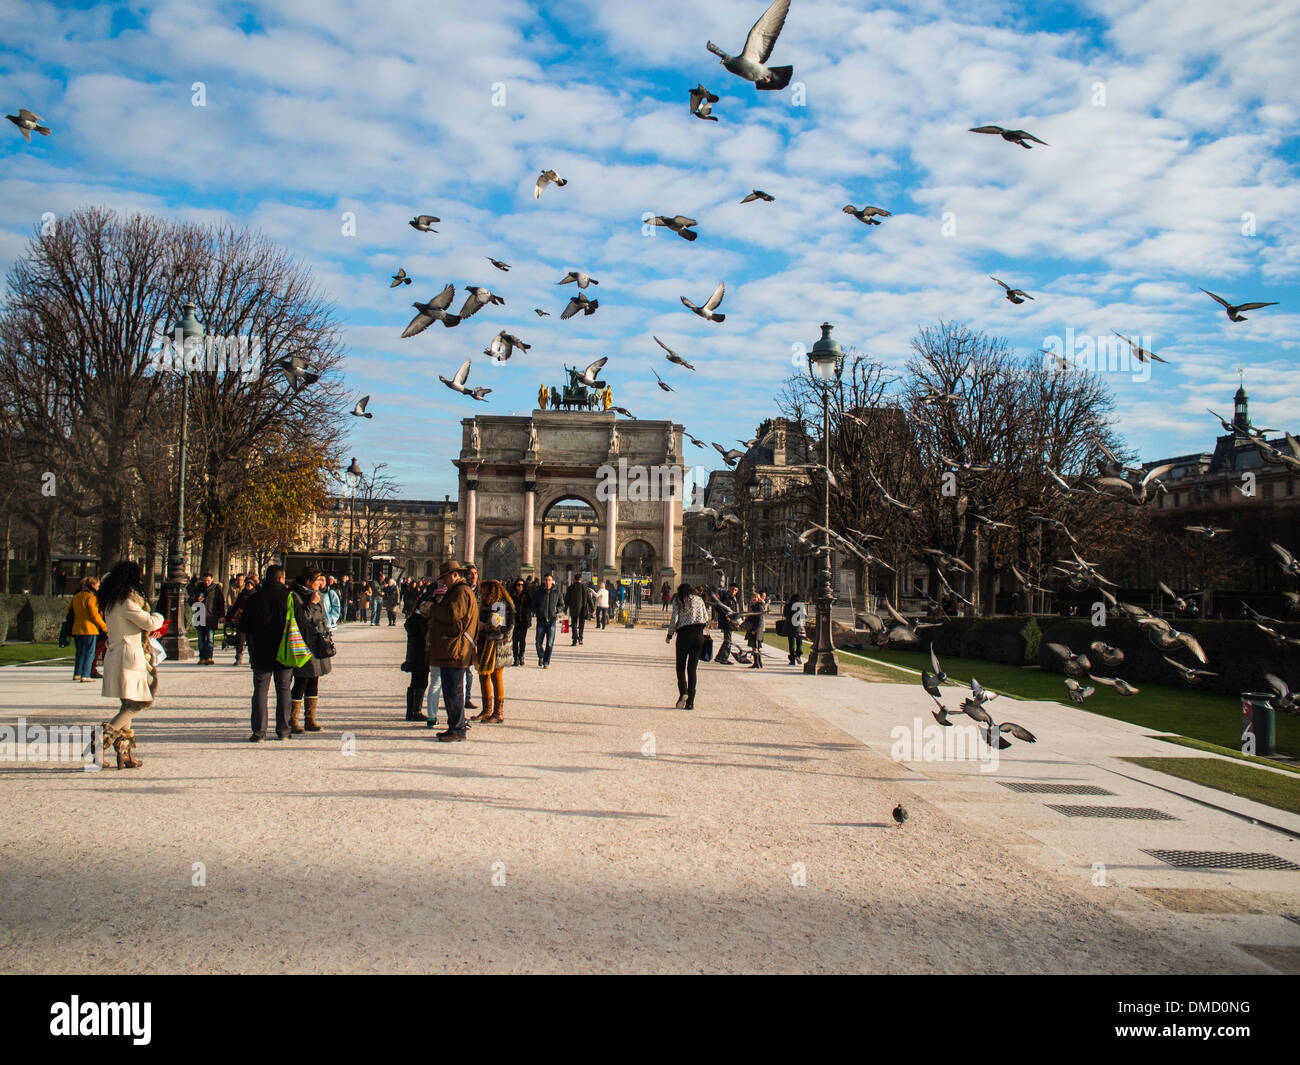 Pigeons fly by tourists close to Carrousel du Louvre arch Stock Photo